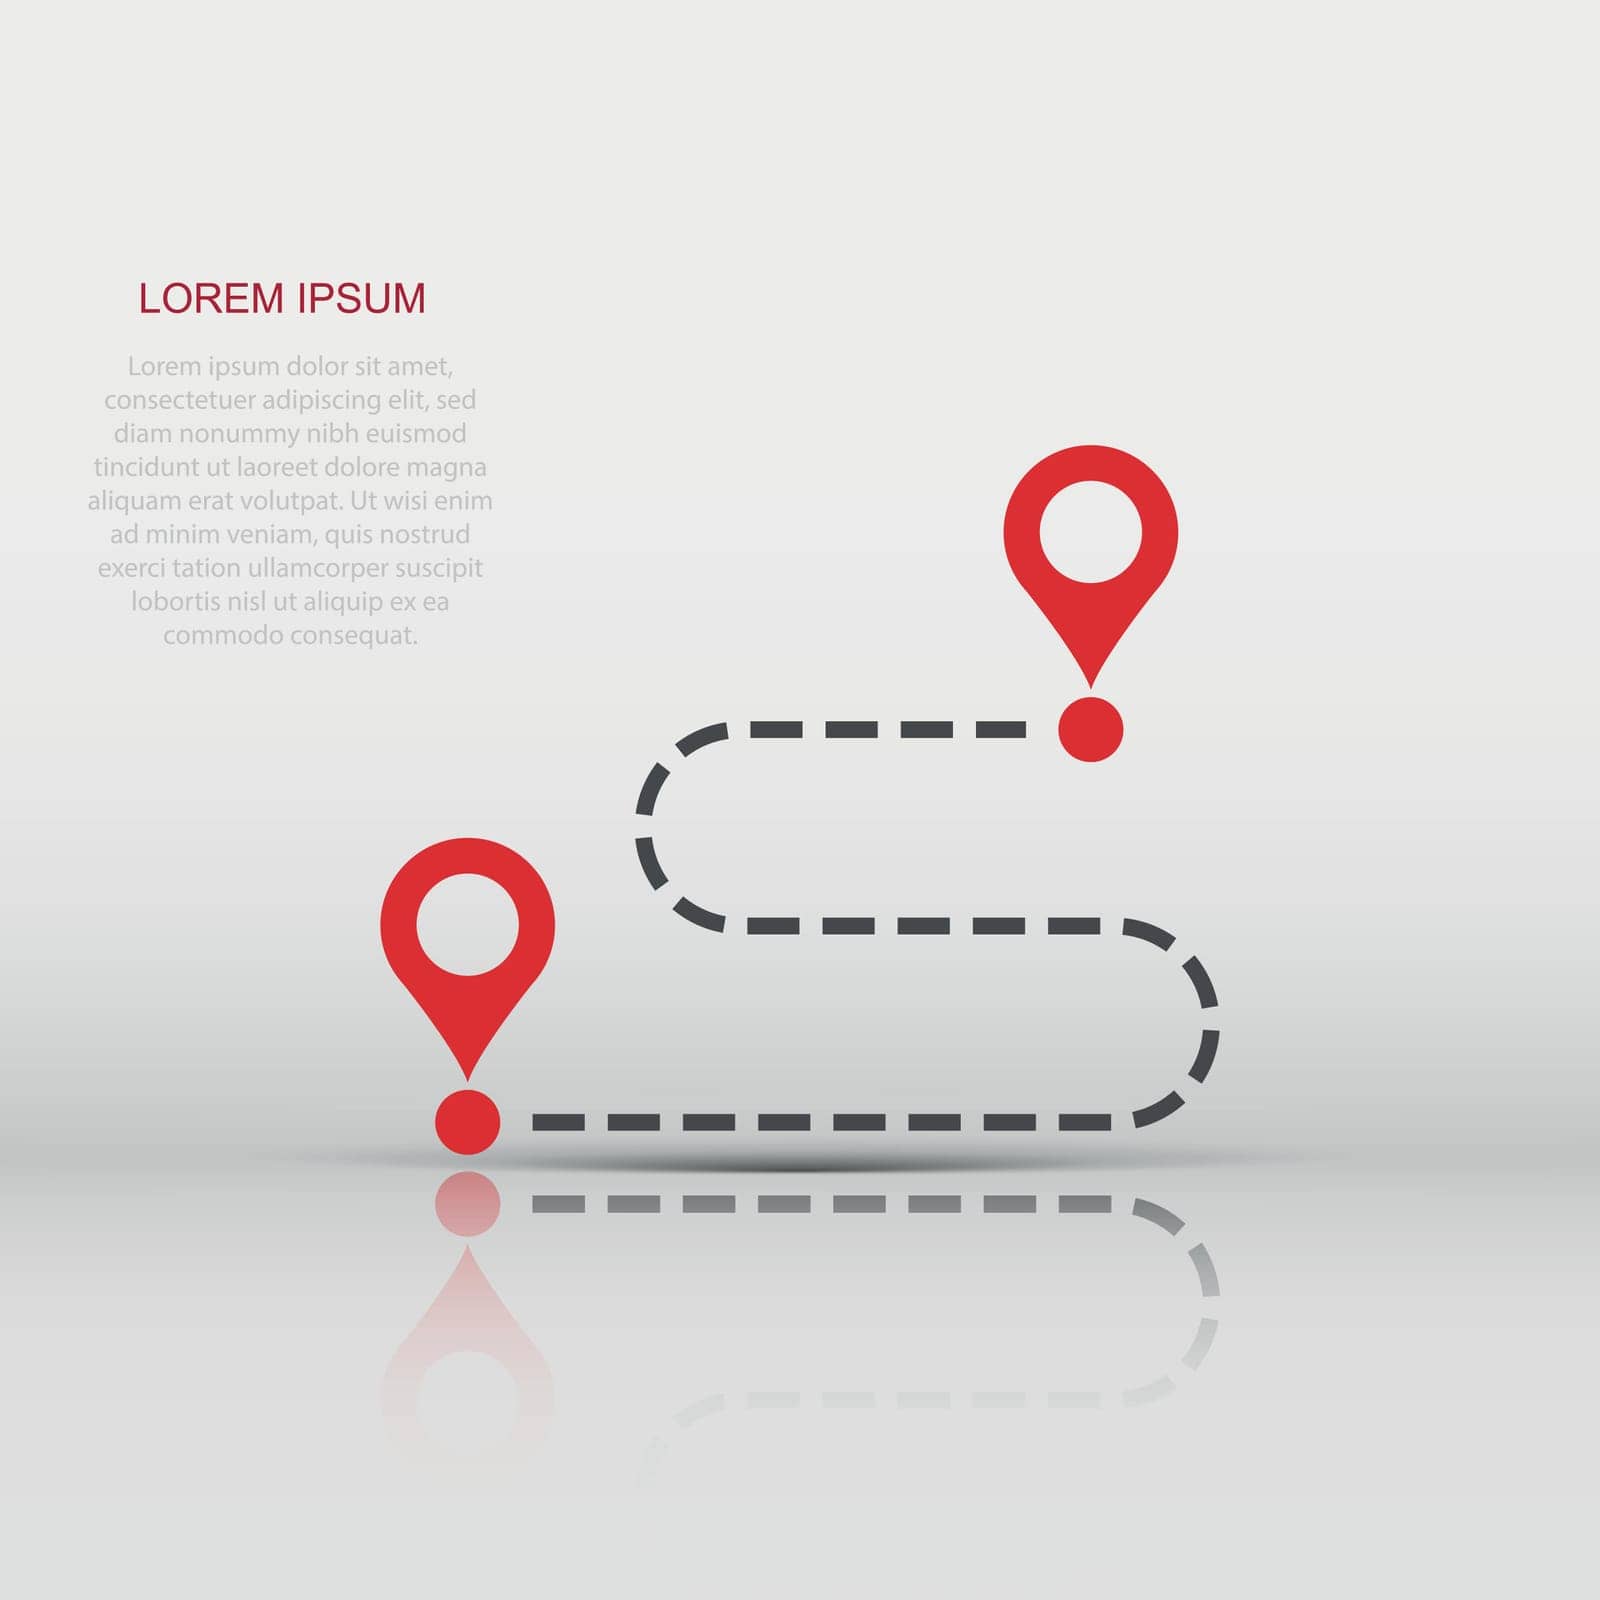 Move location icon in flat style. Pin gps vector illustration on white isolated background. Navigation business concept.